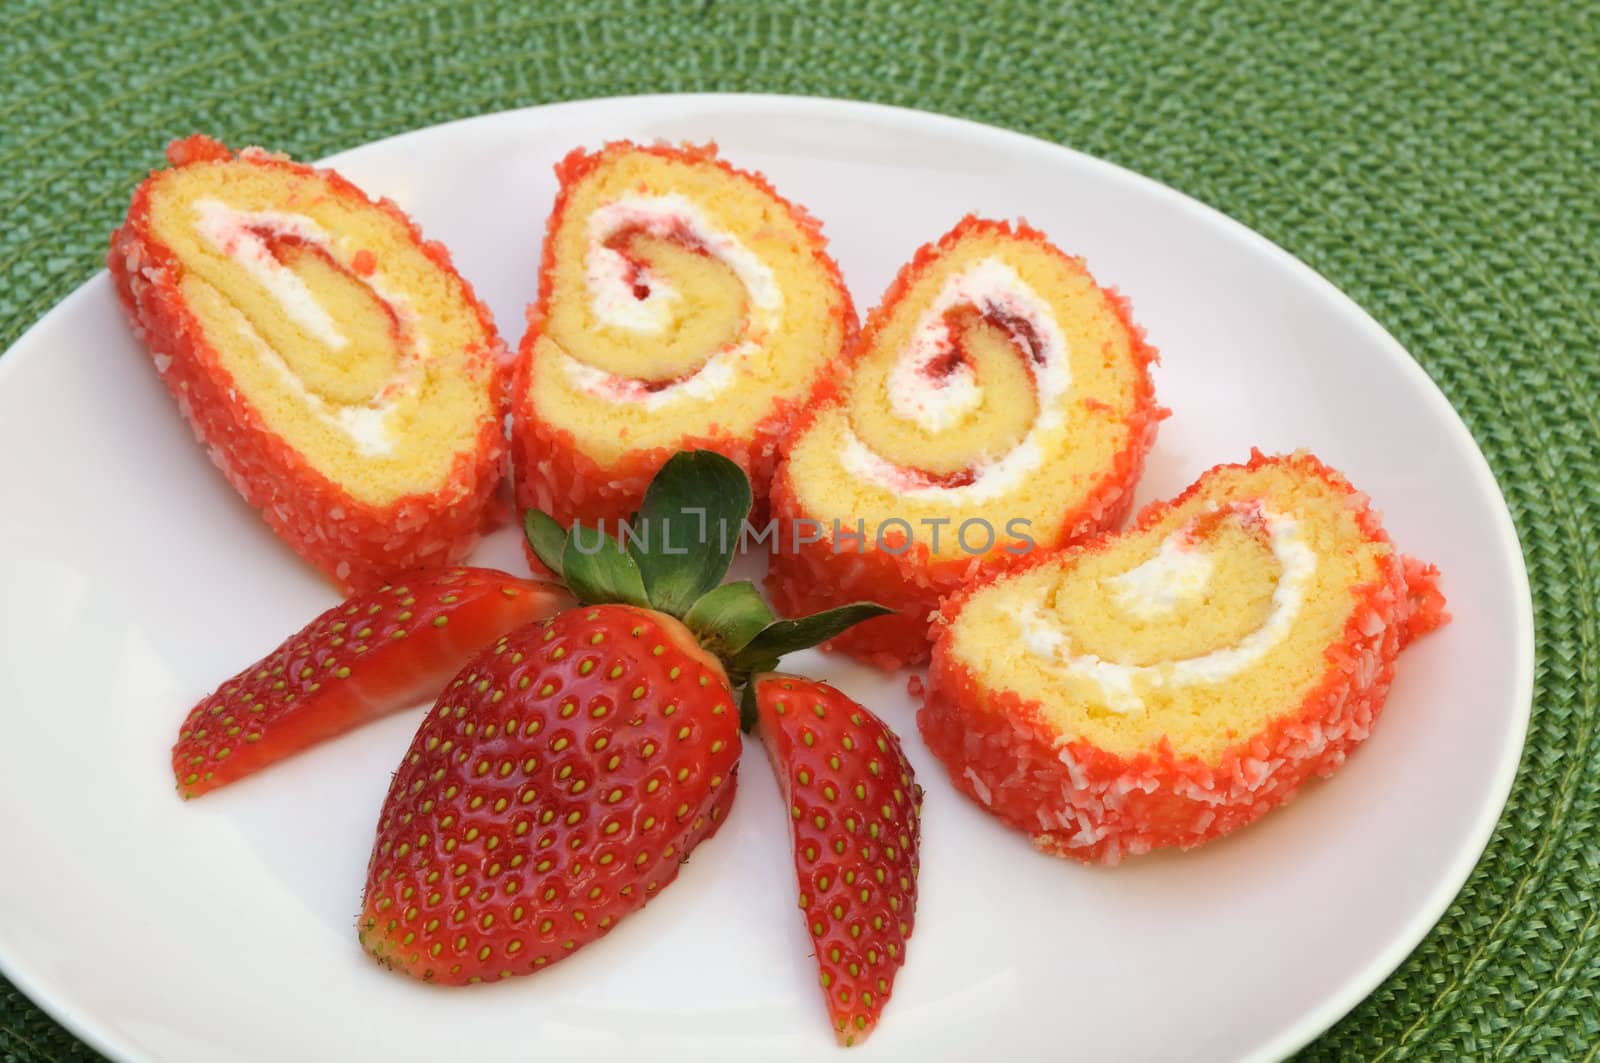 Jam roll cake slices decorated with strawberry on a green mat